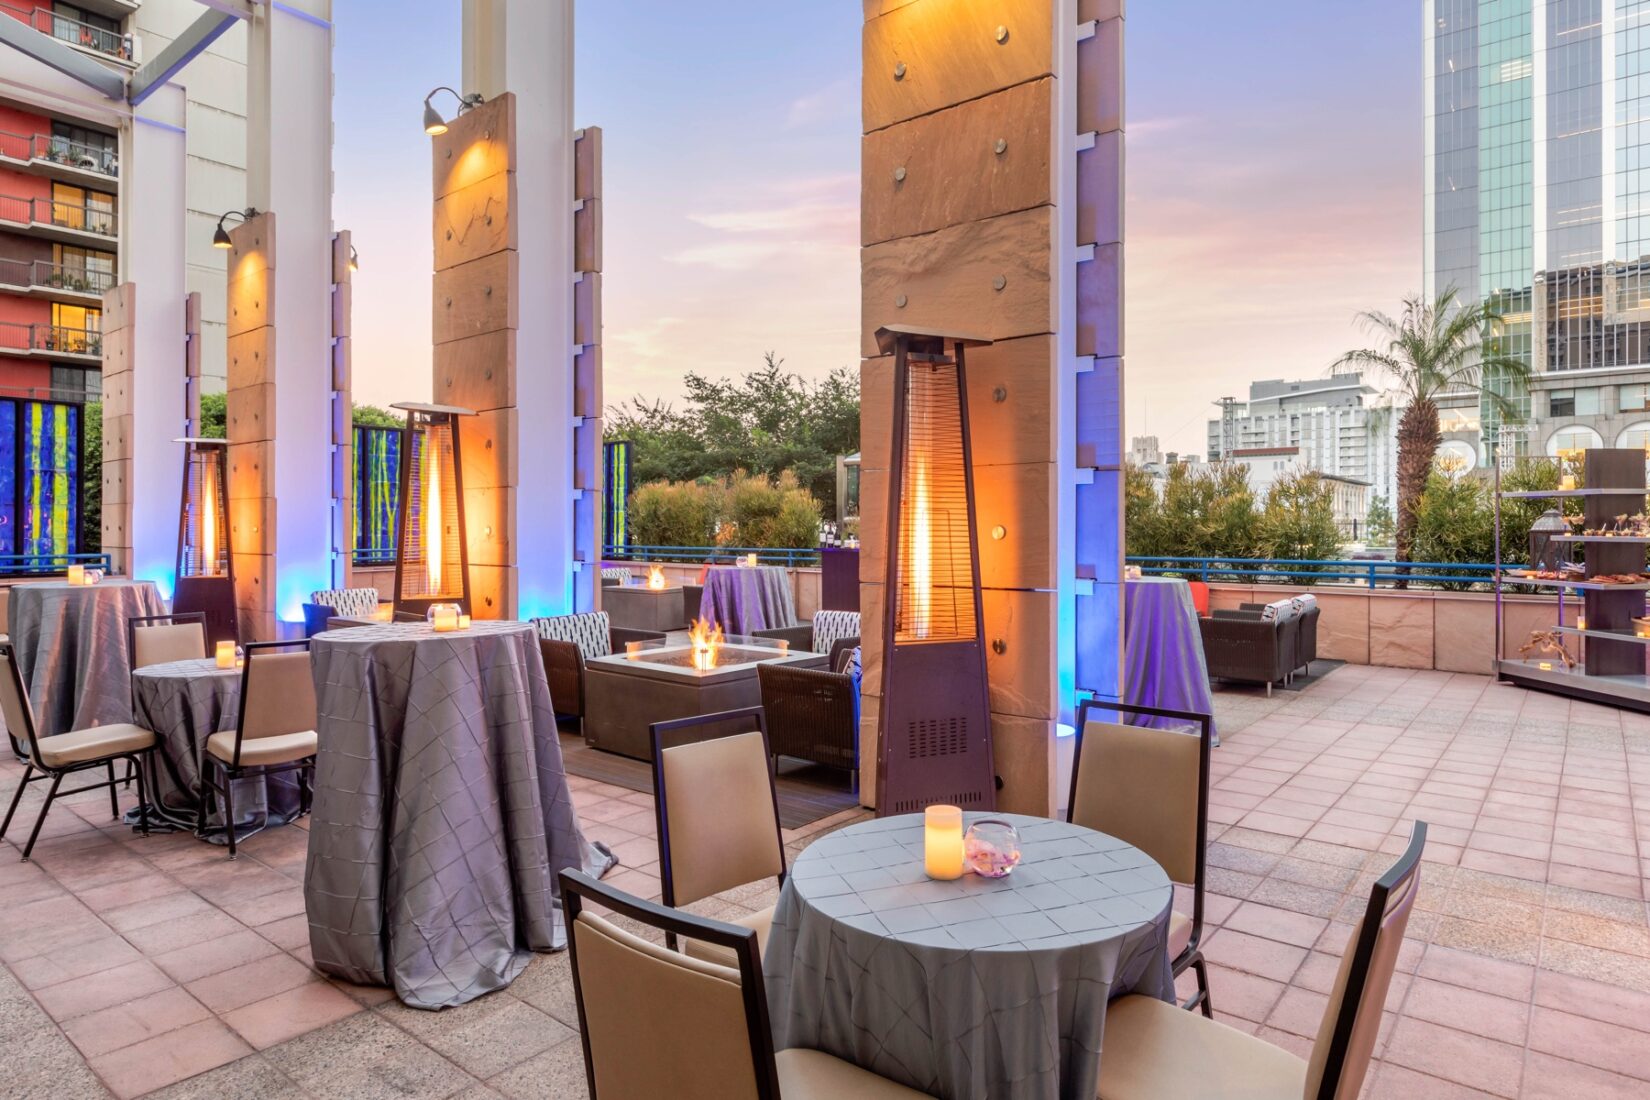 Rooftop Restaurant with Tall Patio Heaters and Fire Pits